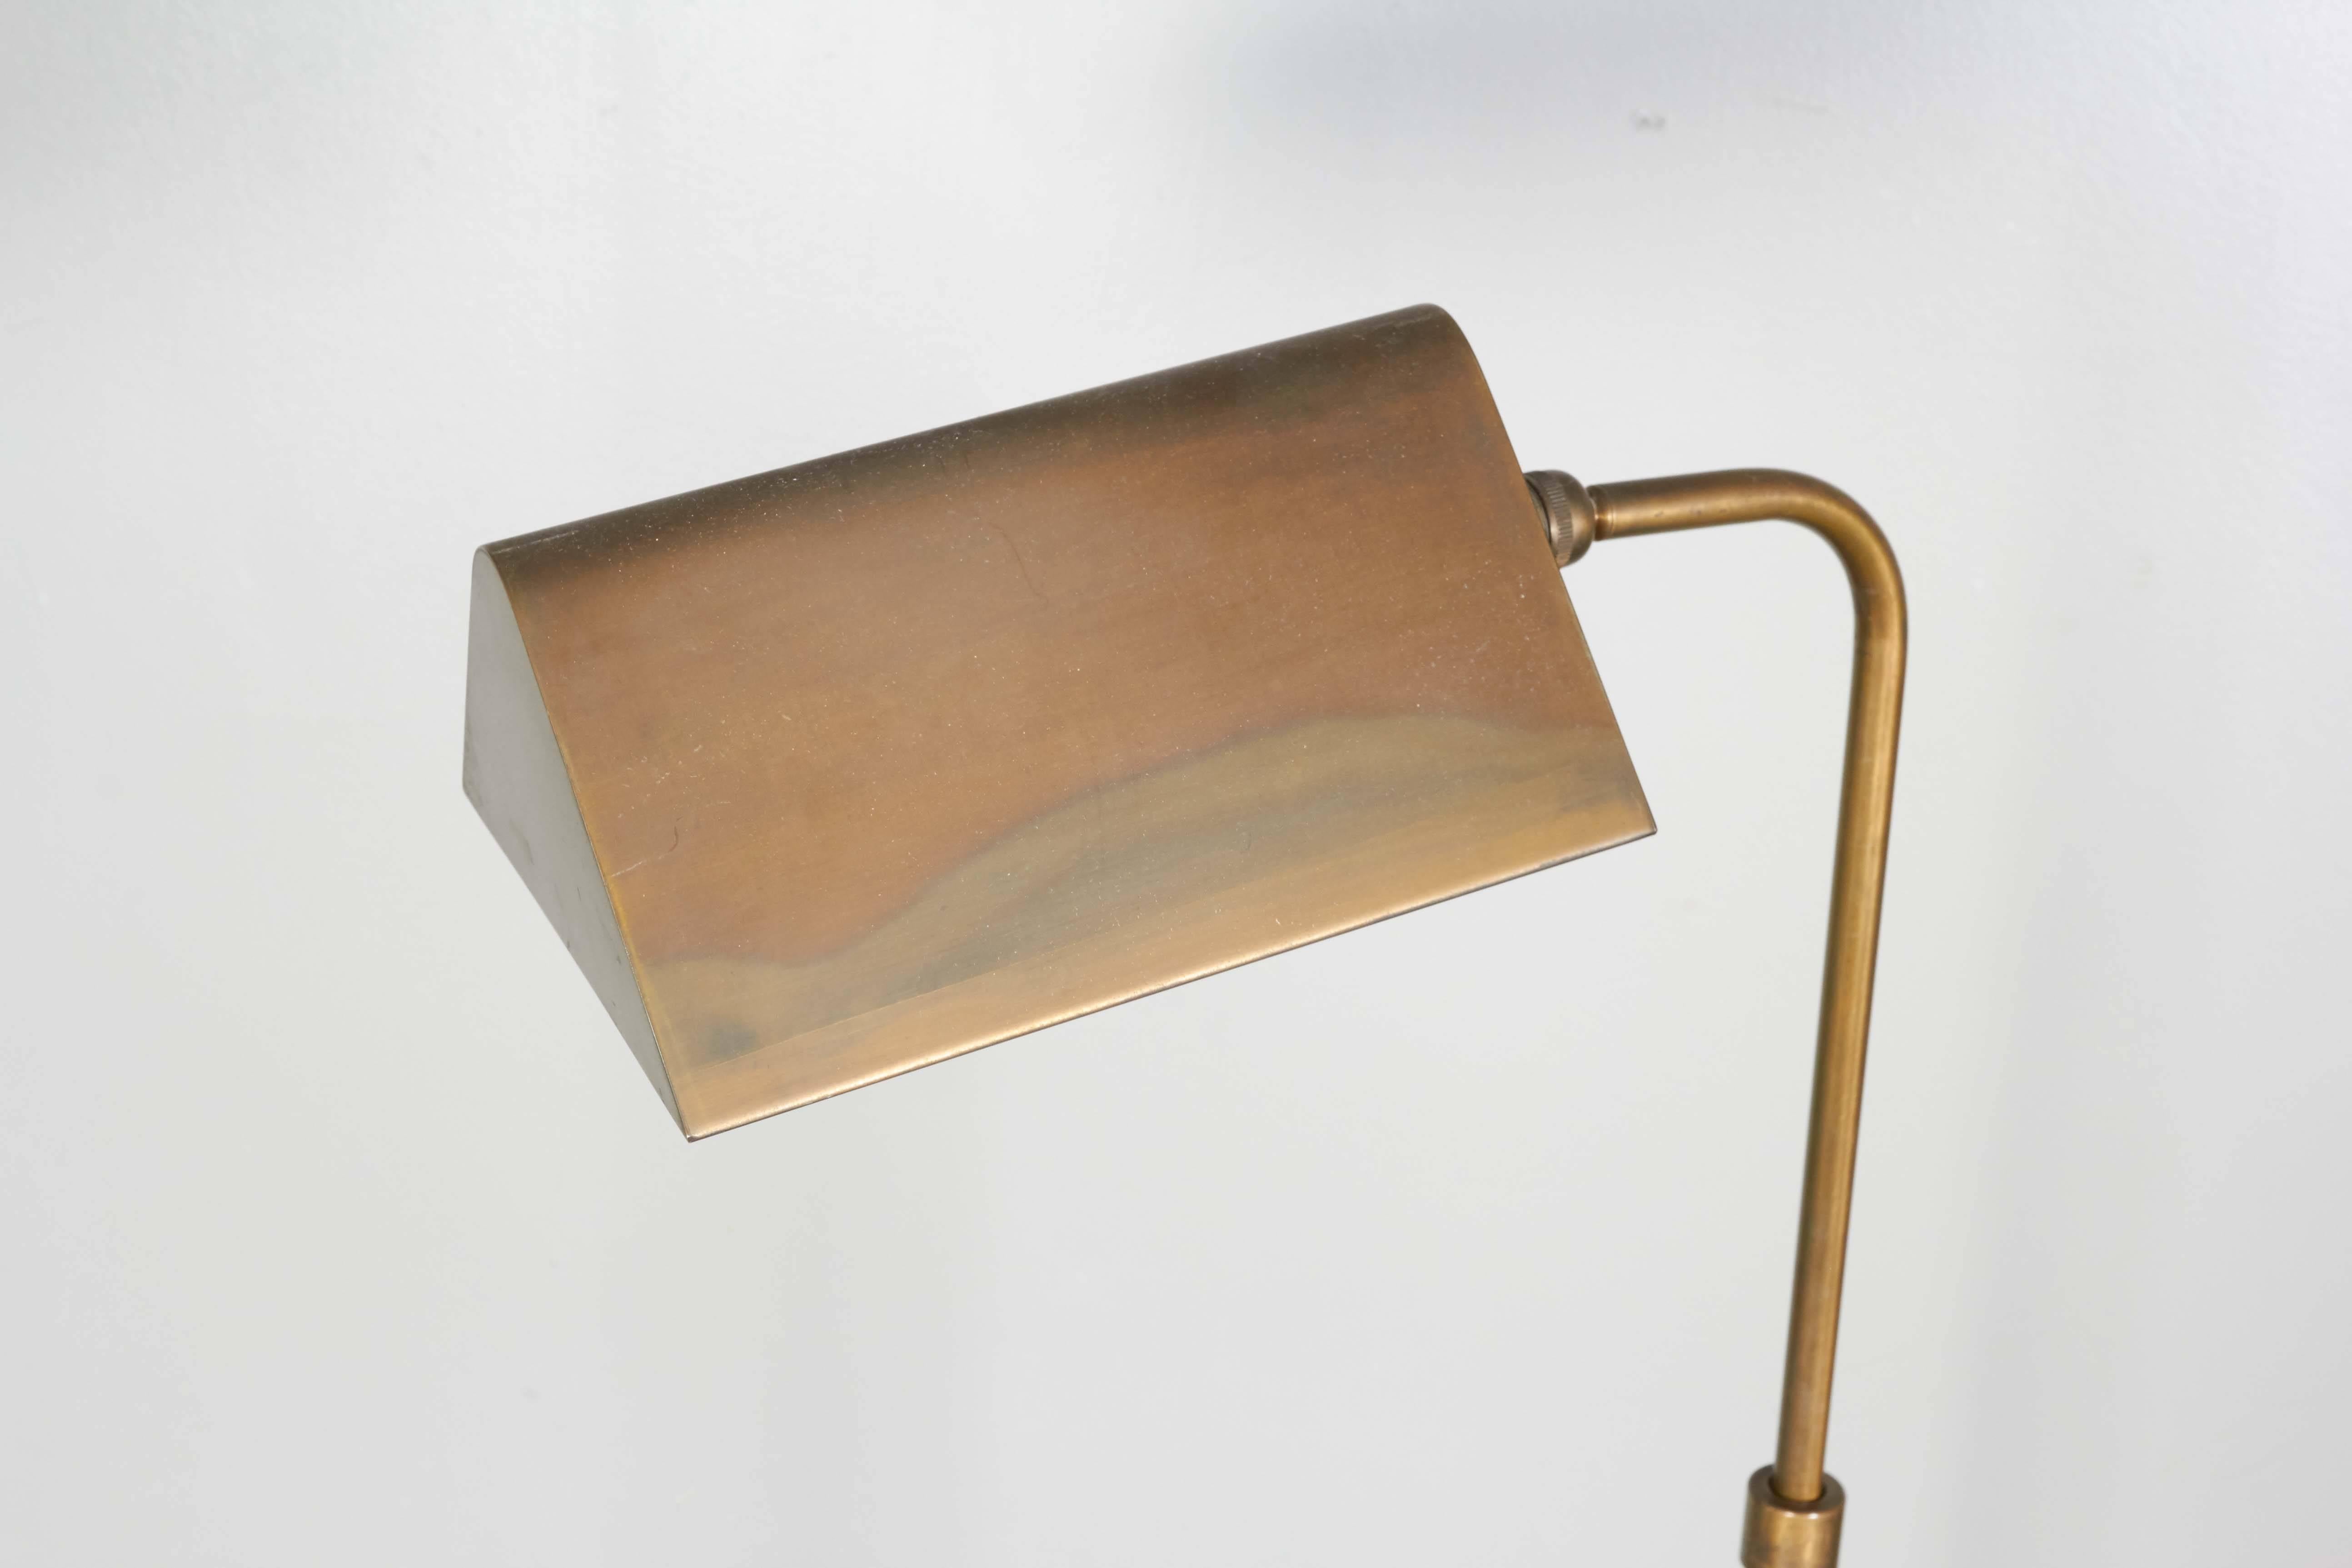 A circa 1960s floor lamp in brass, tent shade with rounded corners and white enamel interior, raised on curved stem and round base. The lamp remains in good vintage condition, with age appropriate patina and minor spots to brass, some wear to enamel